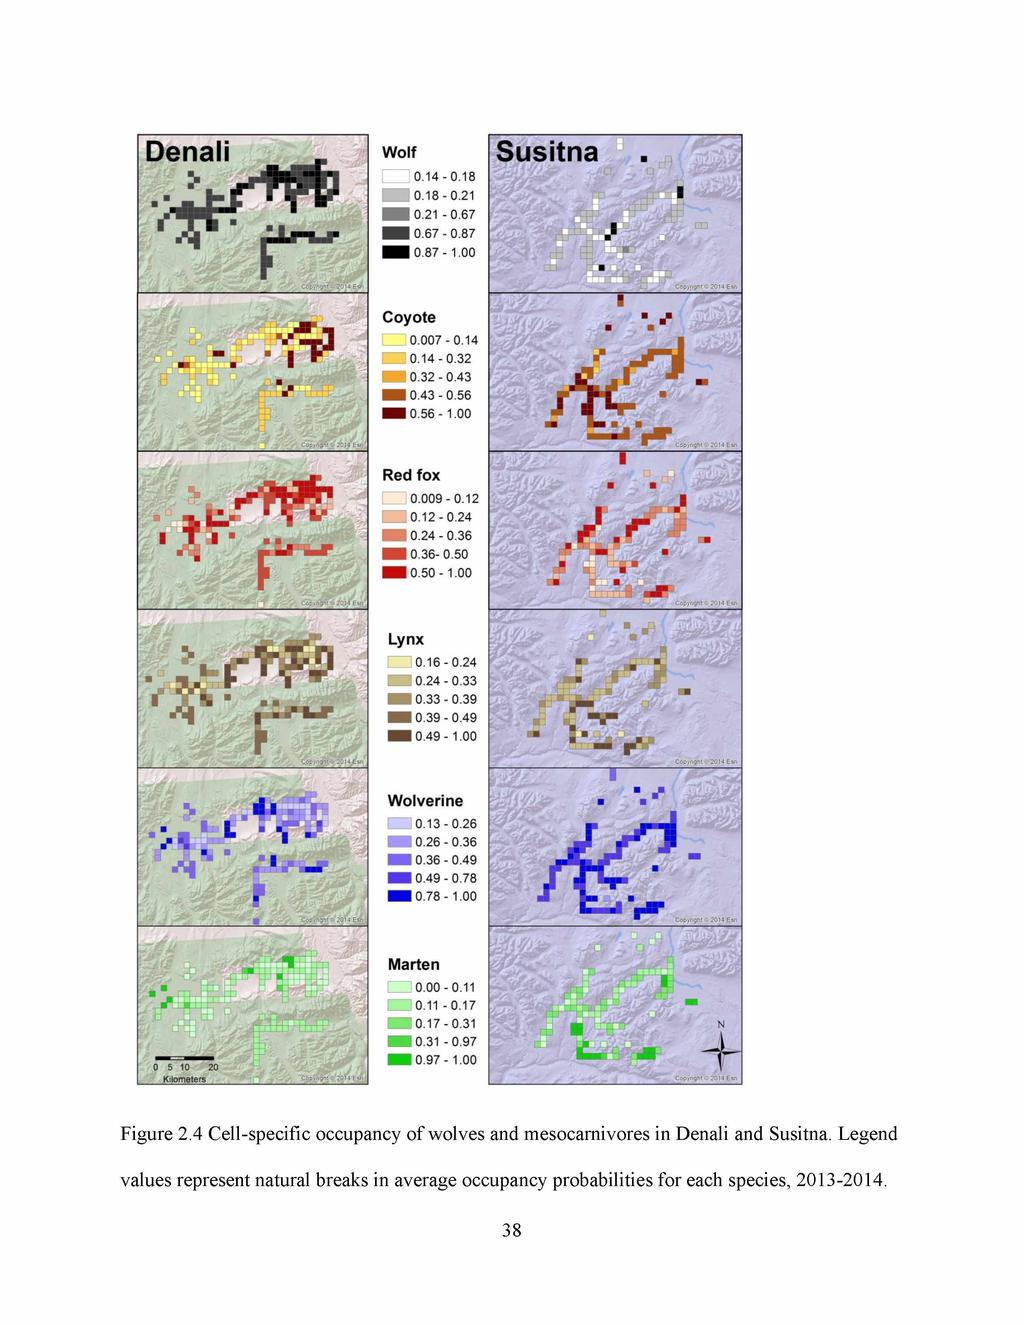 Figure 2.4 Cell-specific occupancy of wolves and mesocarnivores in Denali and Susitna.